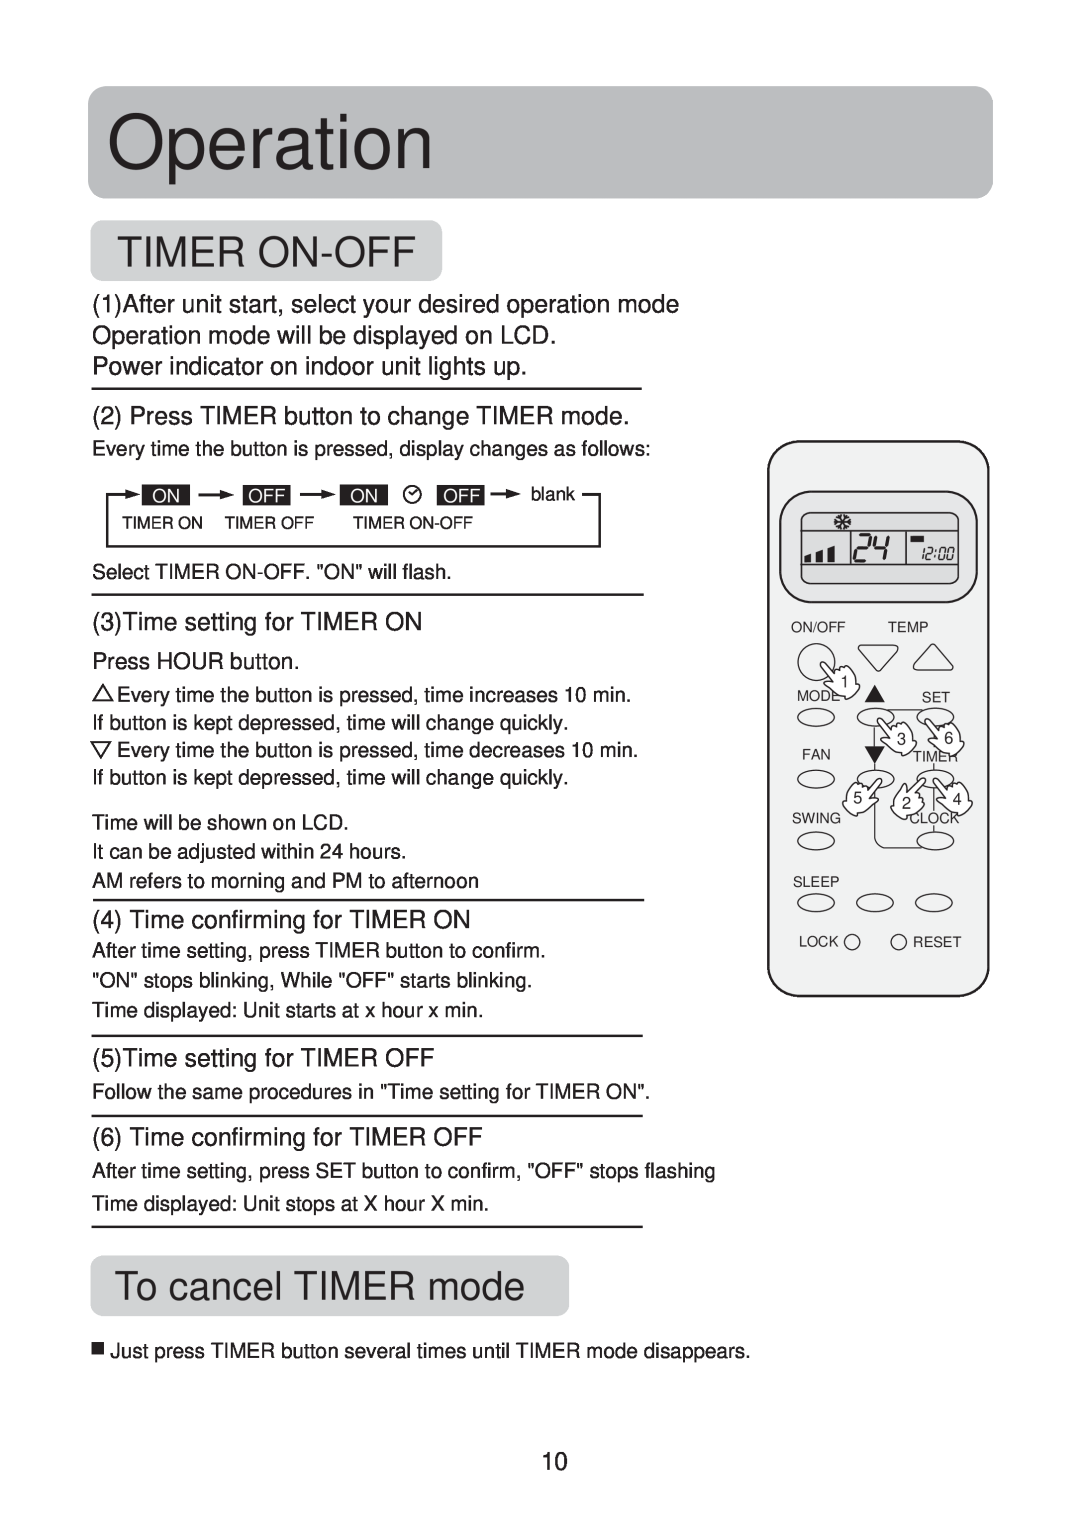 Haier No. 0010551809 Timeron--Off, To cancel TIMER mode, Operation, Power indicator on indoor unit lights up 